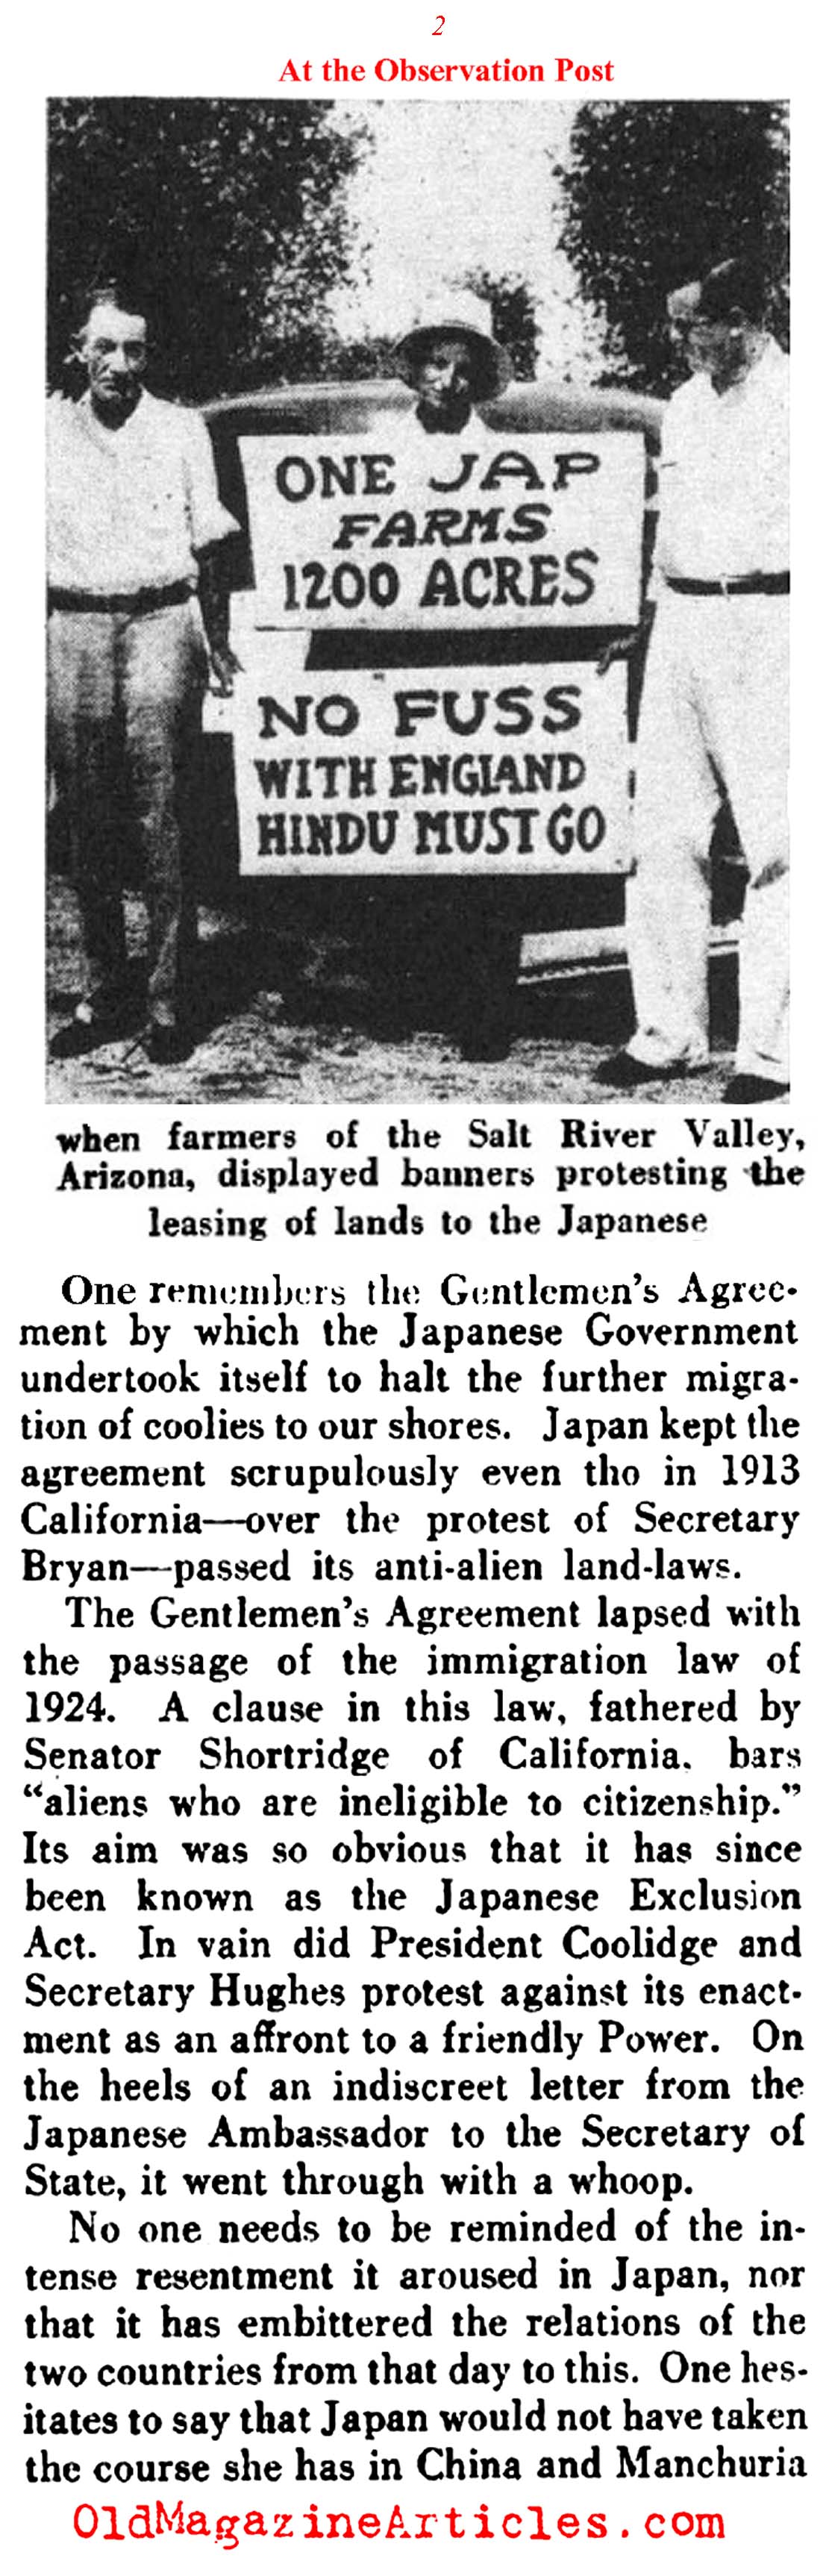 A Call to Repeal the Japanese Exclusion Act (Literary Digest, 1935)